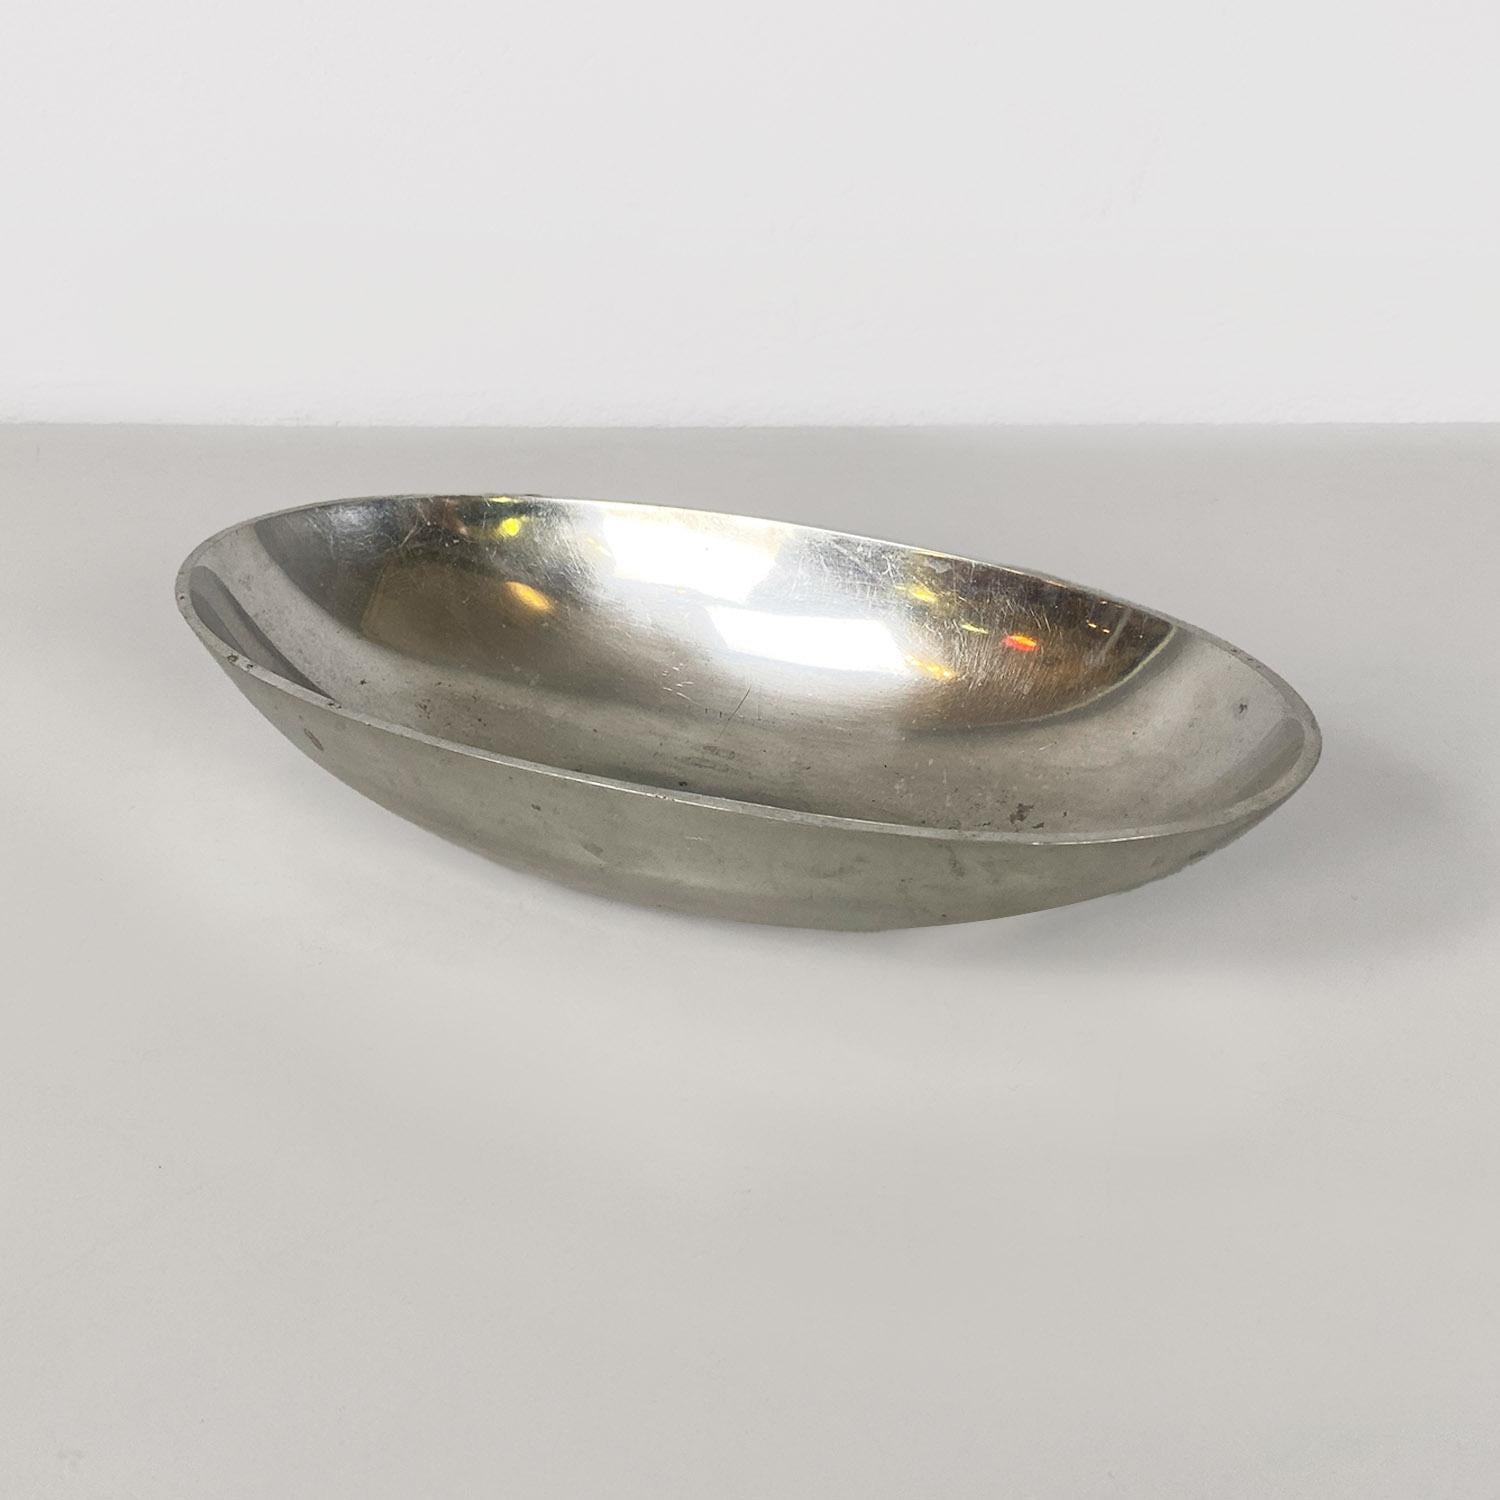 Italian modern metal oval serving bowl or container by La Rinascente, 1990s.
Oval-shaped metal serving bowl or container, ideal for serving appetizers and aperitifs.
Produced by La Rinascente in approx. 1990, with logo label.
Good condition, with